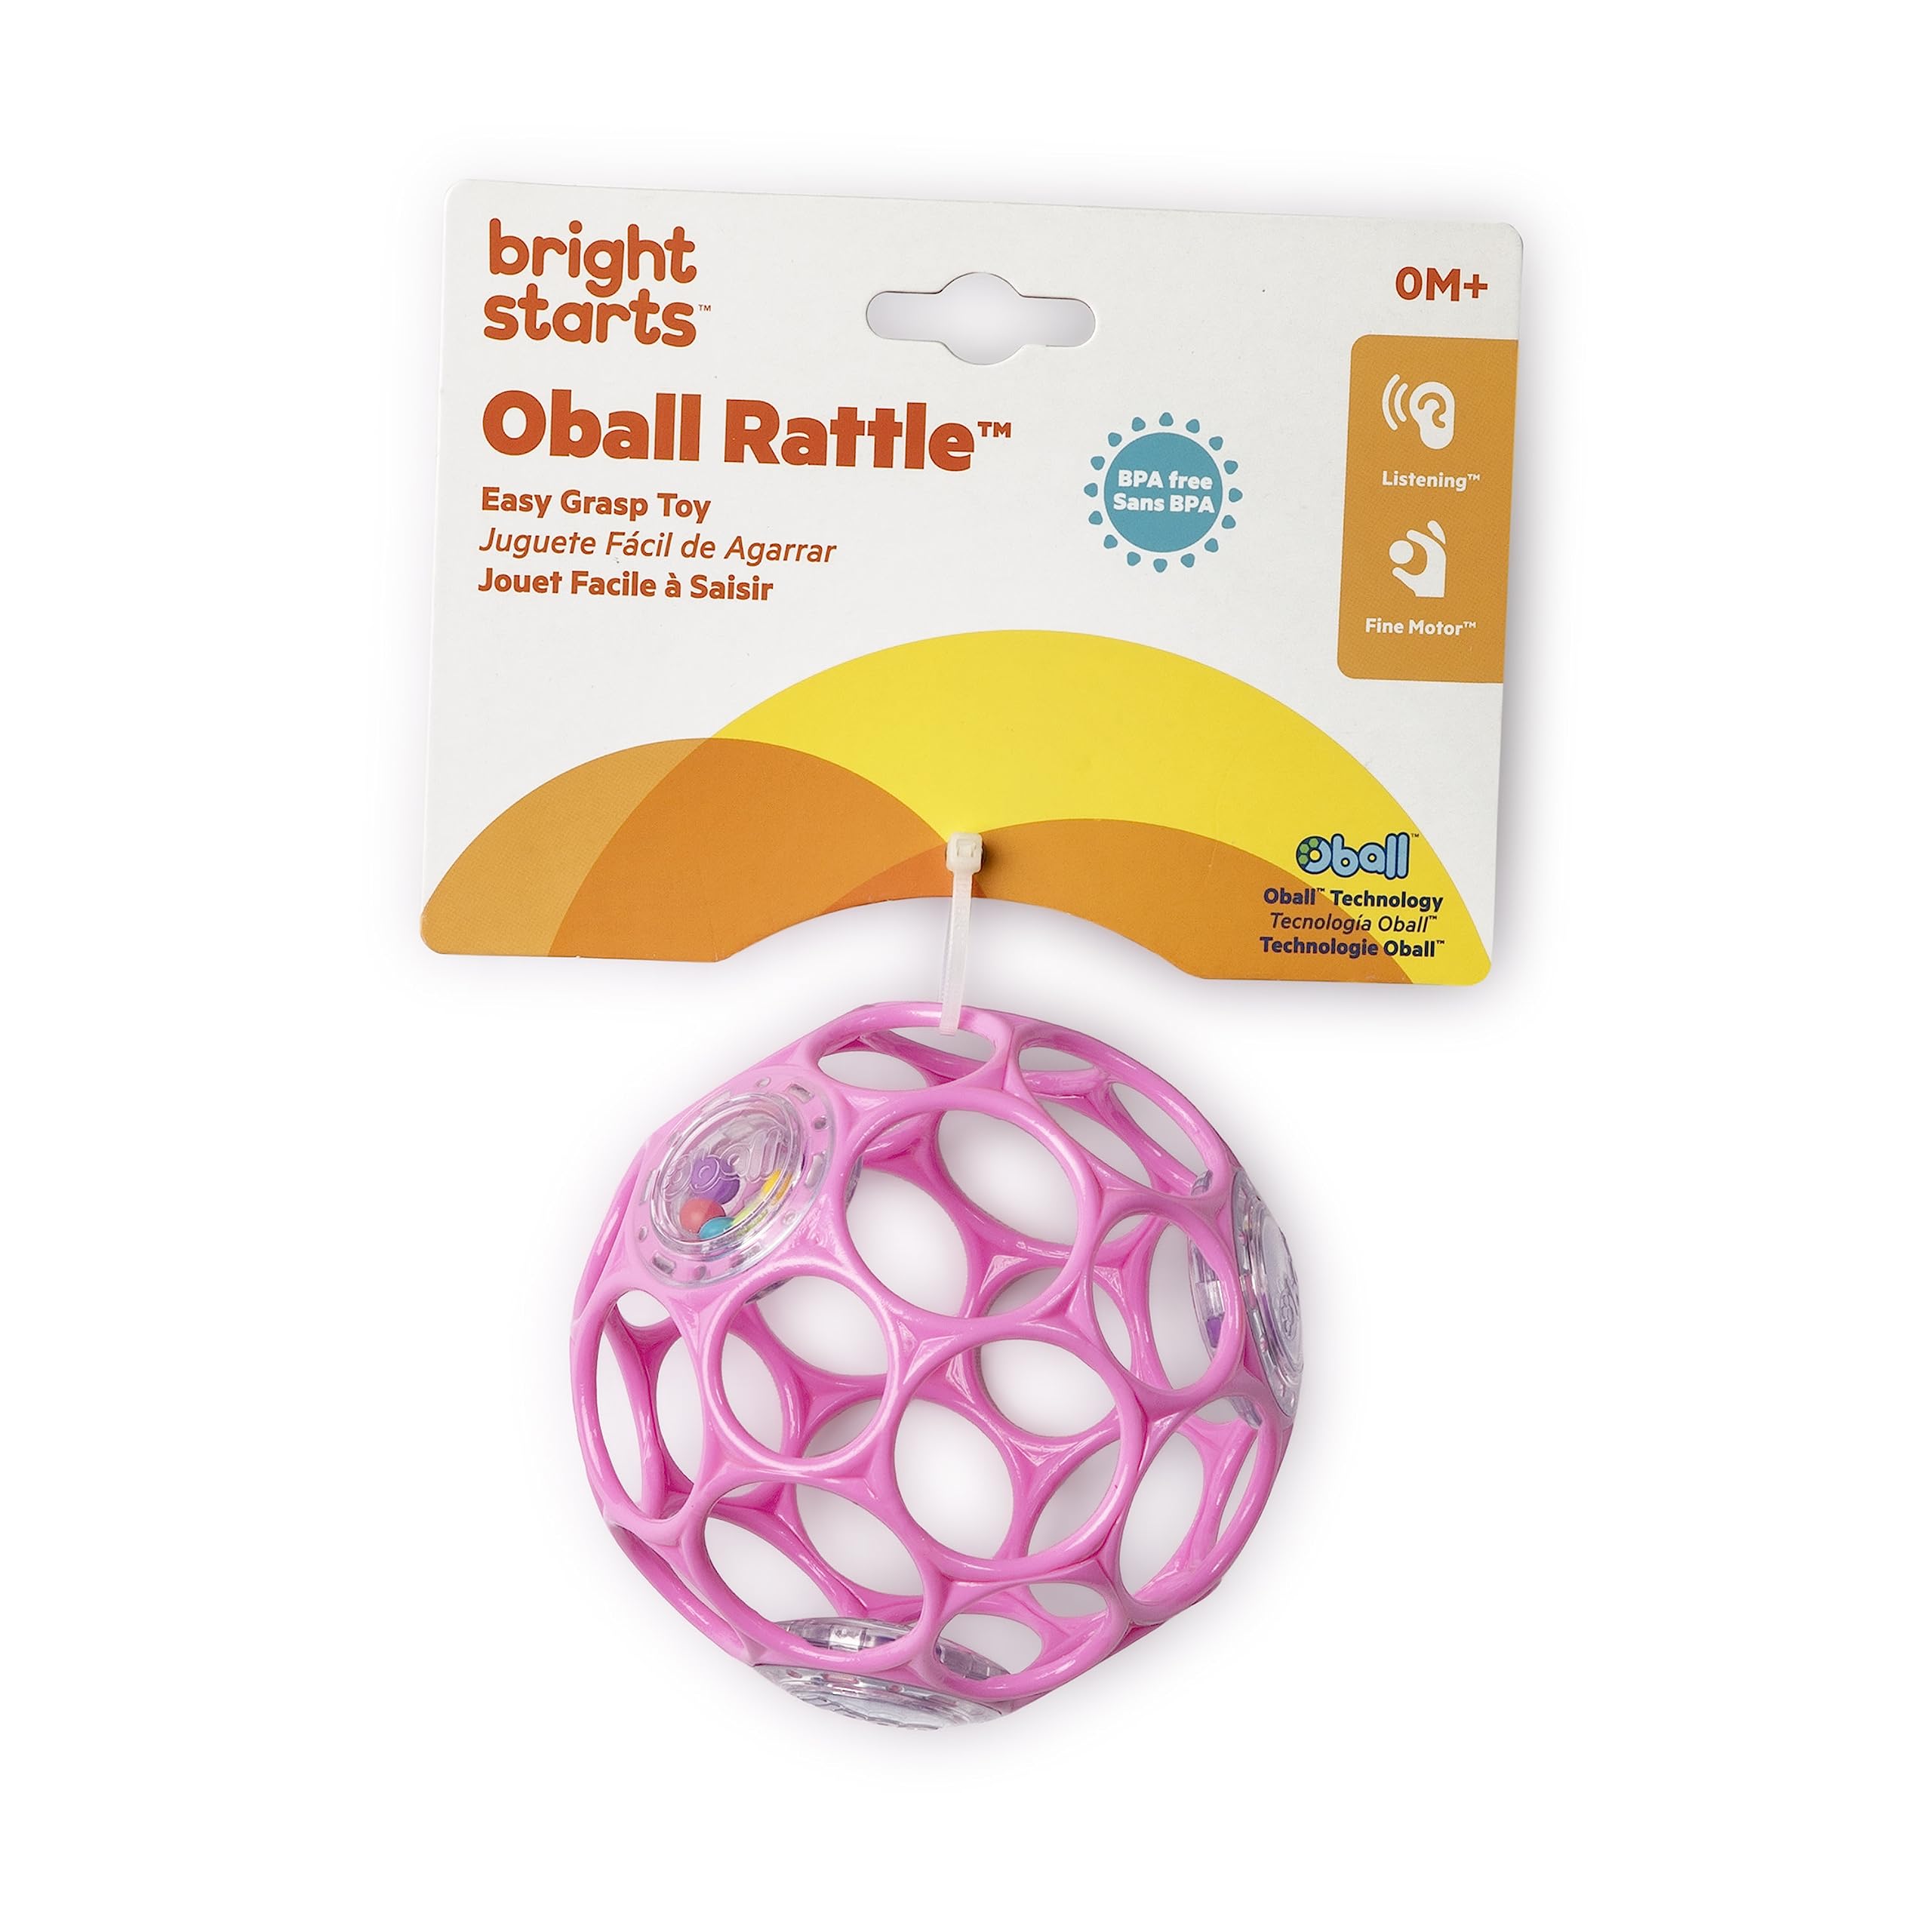 Bright Starts 12030 Oball Rattle, Baby Stroller Toy, Teeth, Rattle, Softball, Baby Shower, Baby Pink